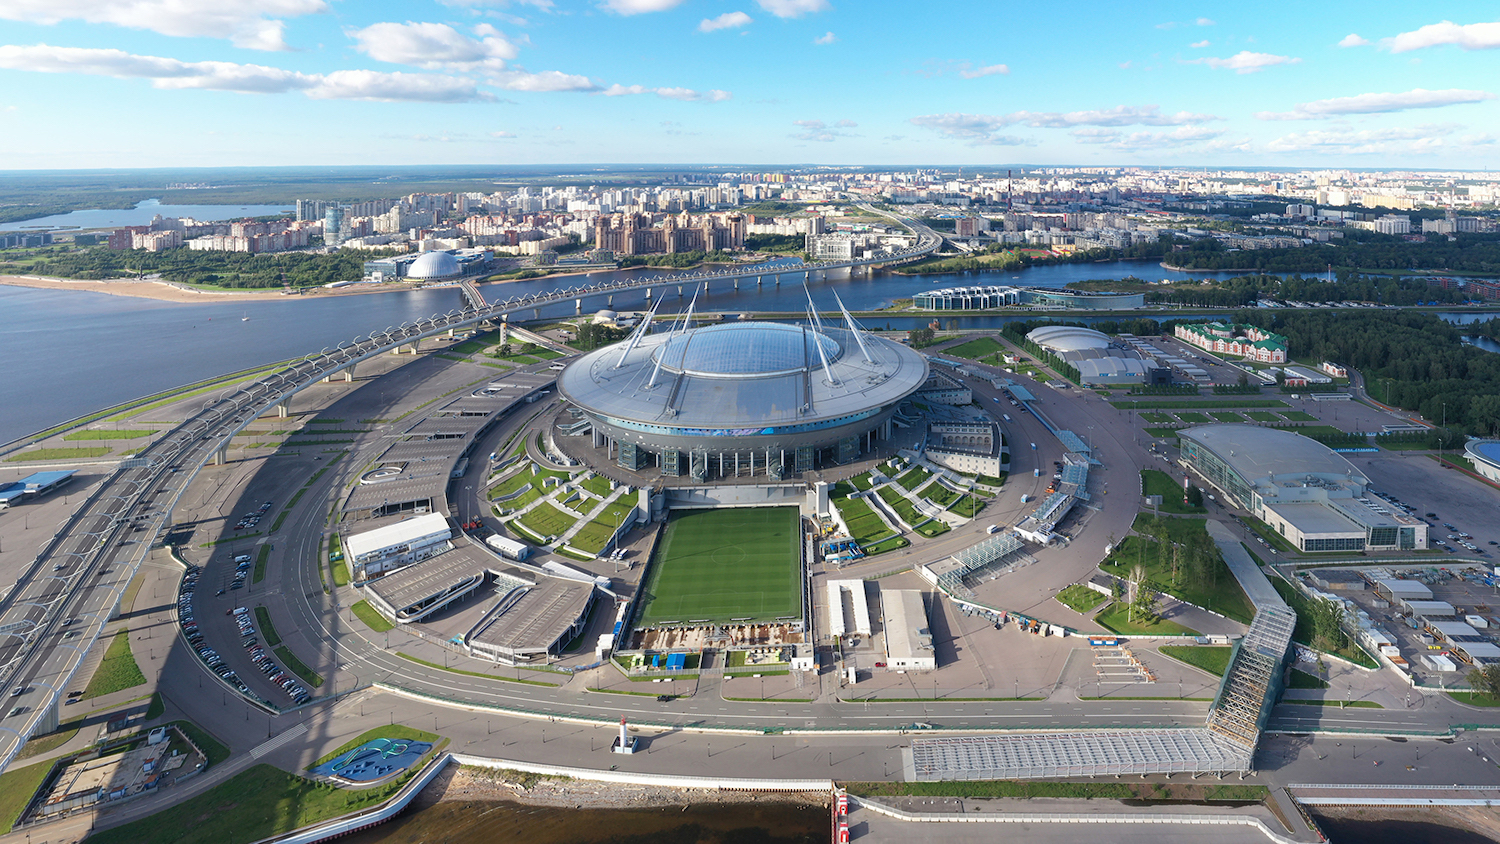 Gazprom Arena in St. Petersburg, Russia - Putin's Invasion of Ukraine Will Impact Russian Sports For Decades - College of Natural Resources News - NC State University